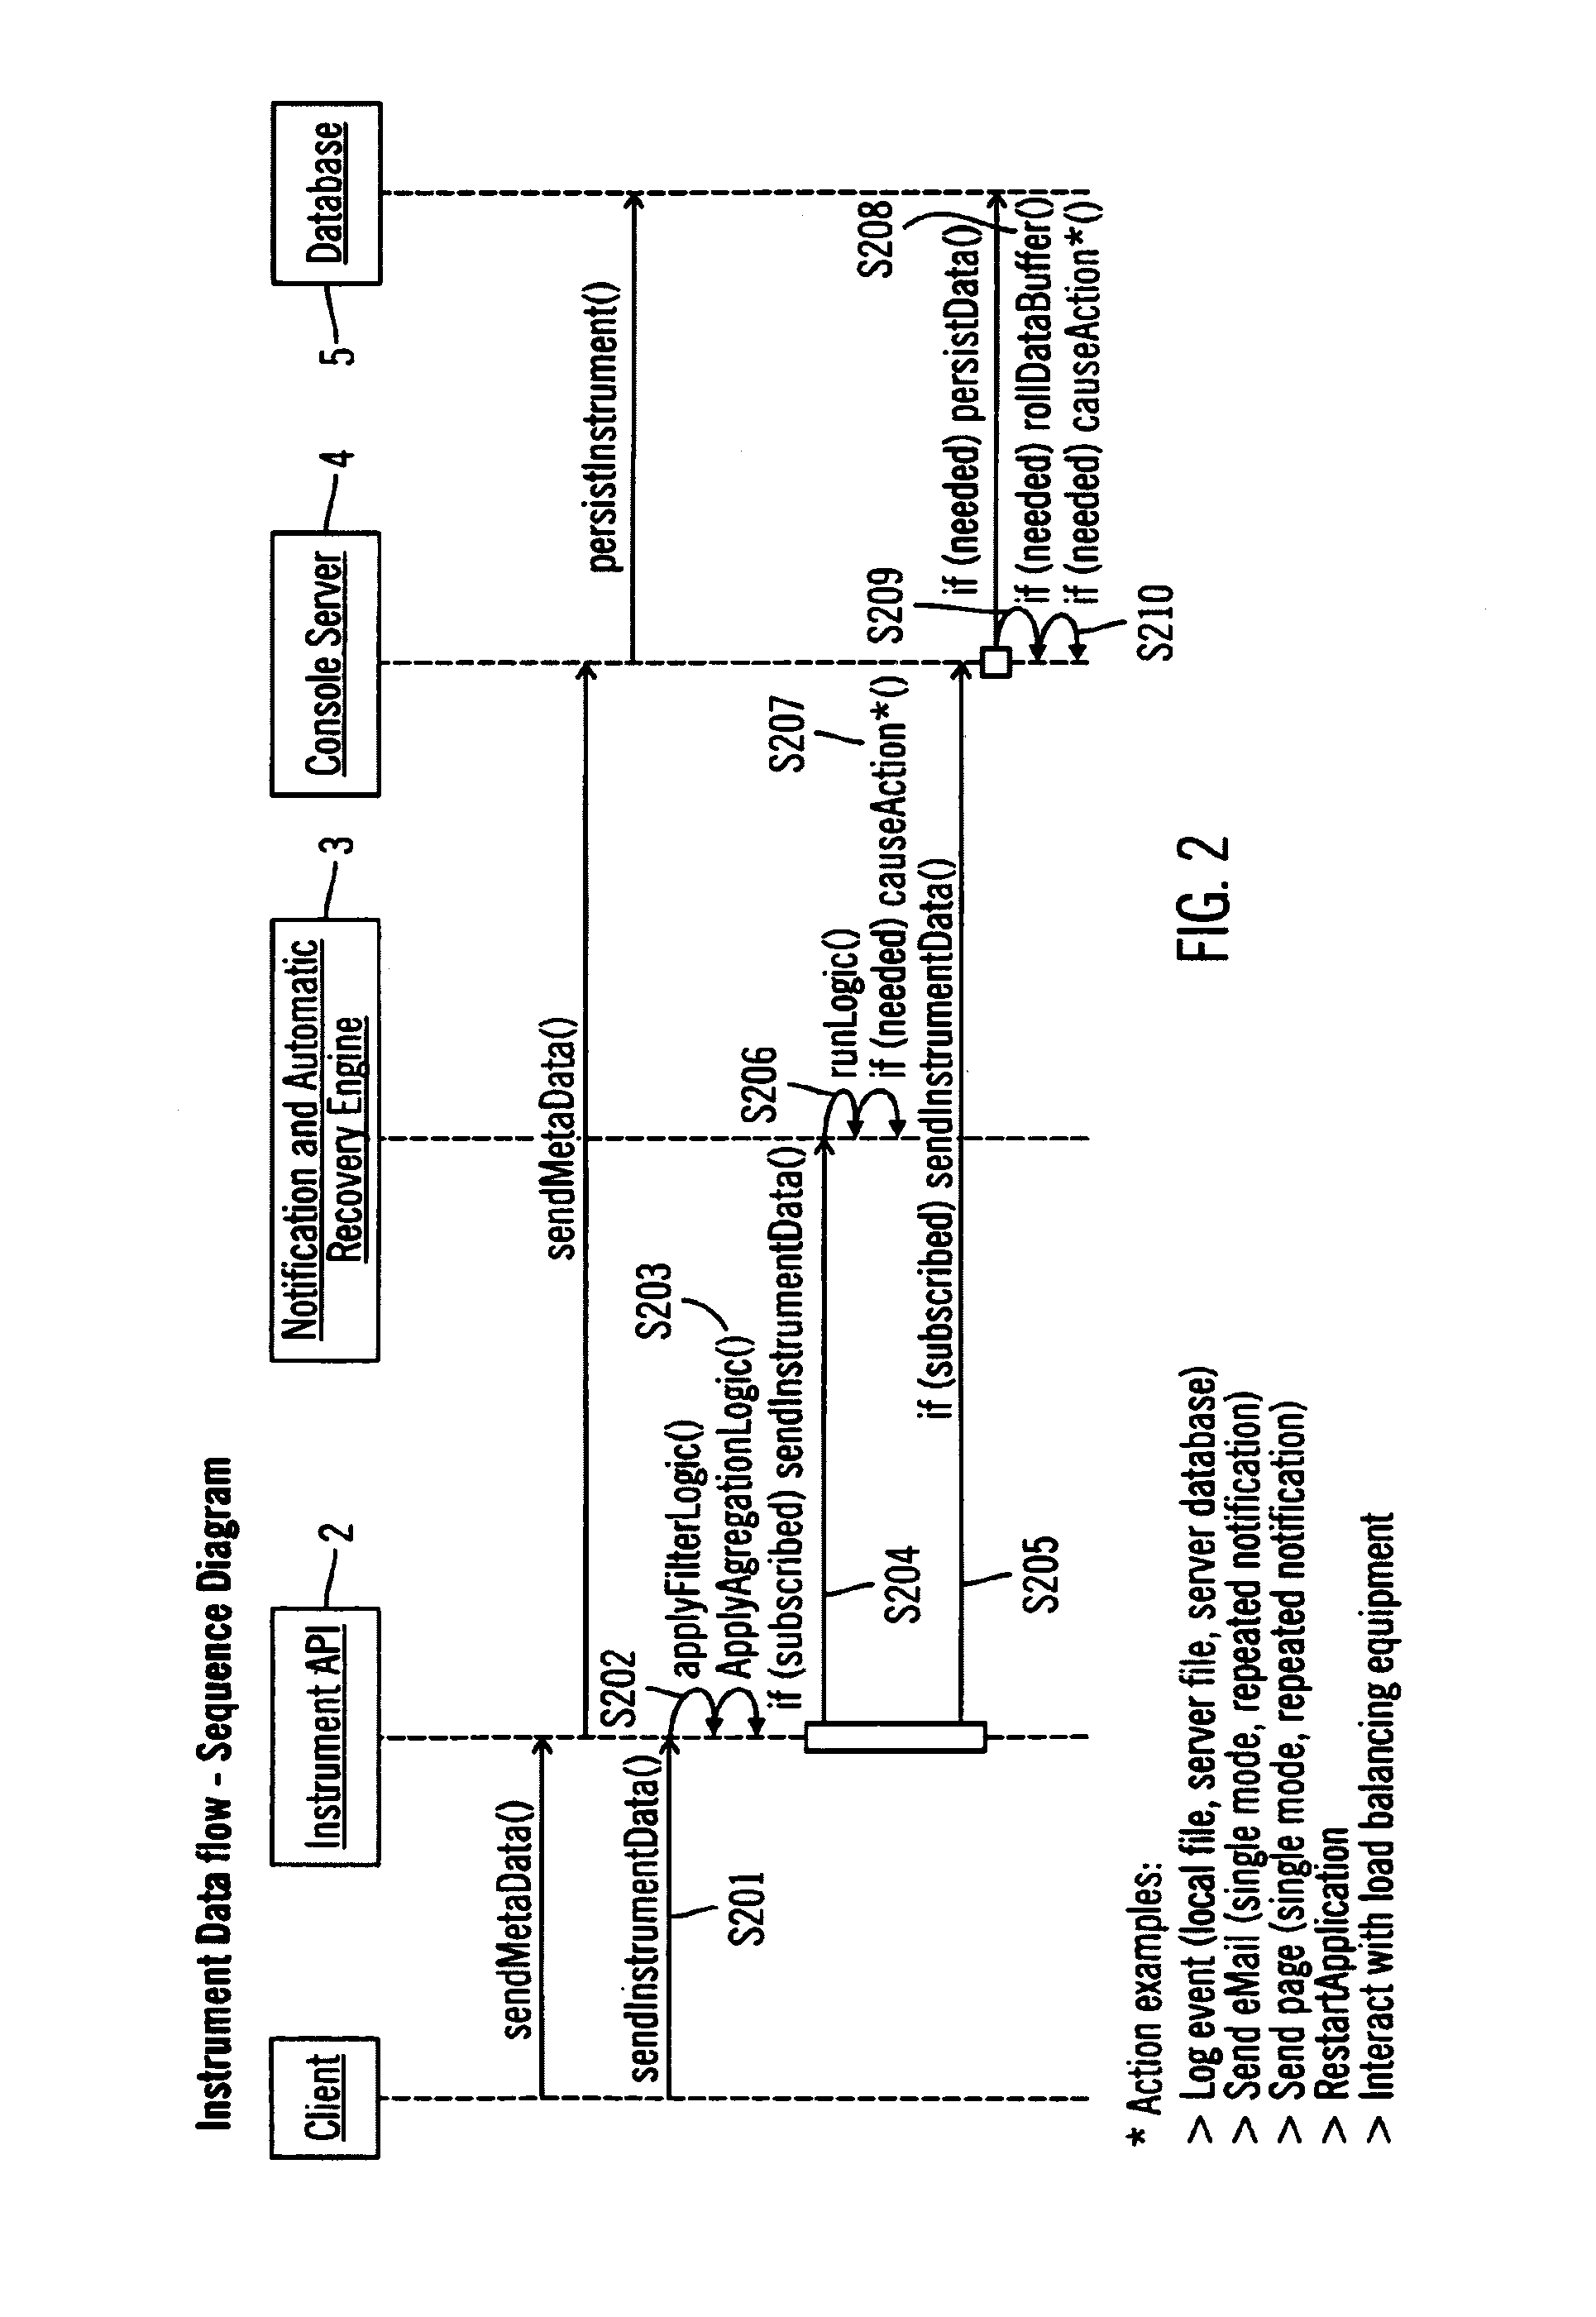 Application manager for monitoring and recovery of software based application processes